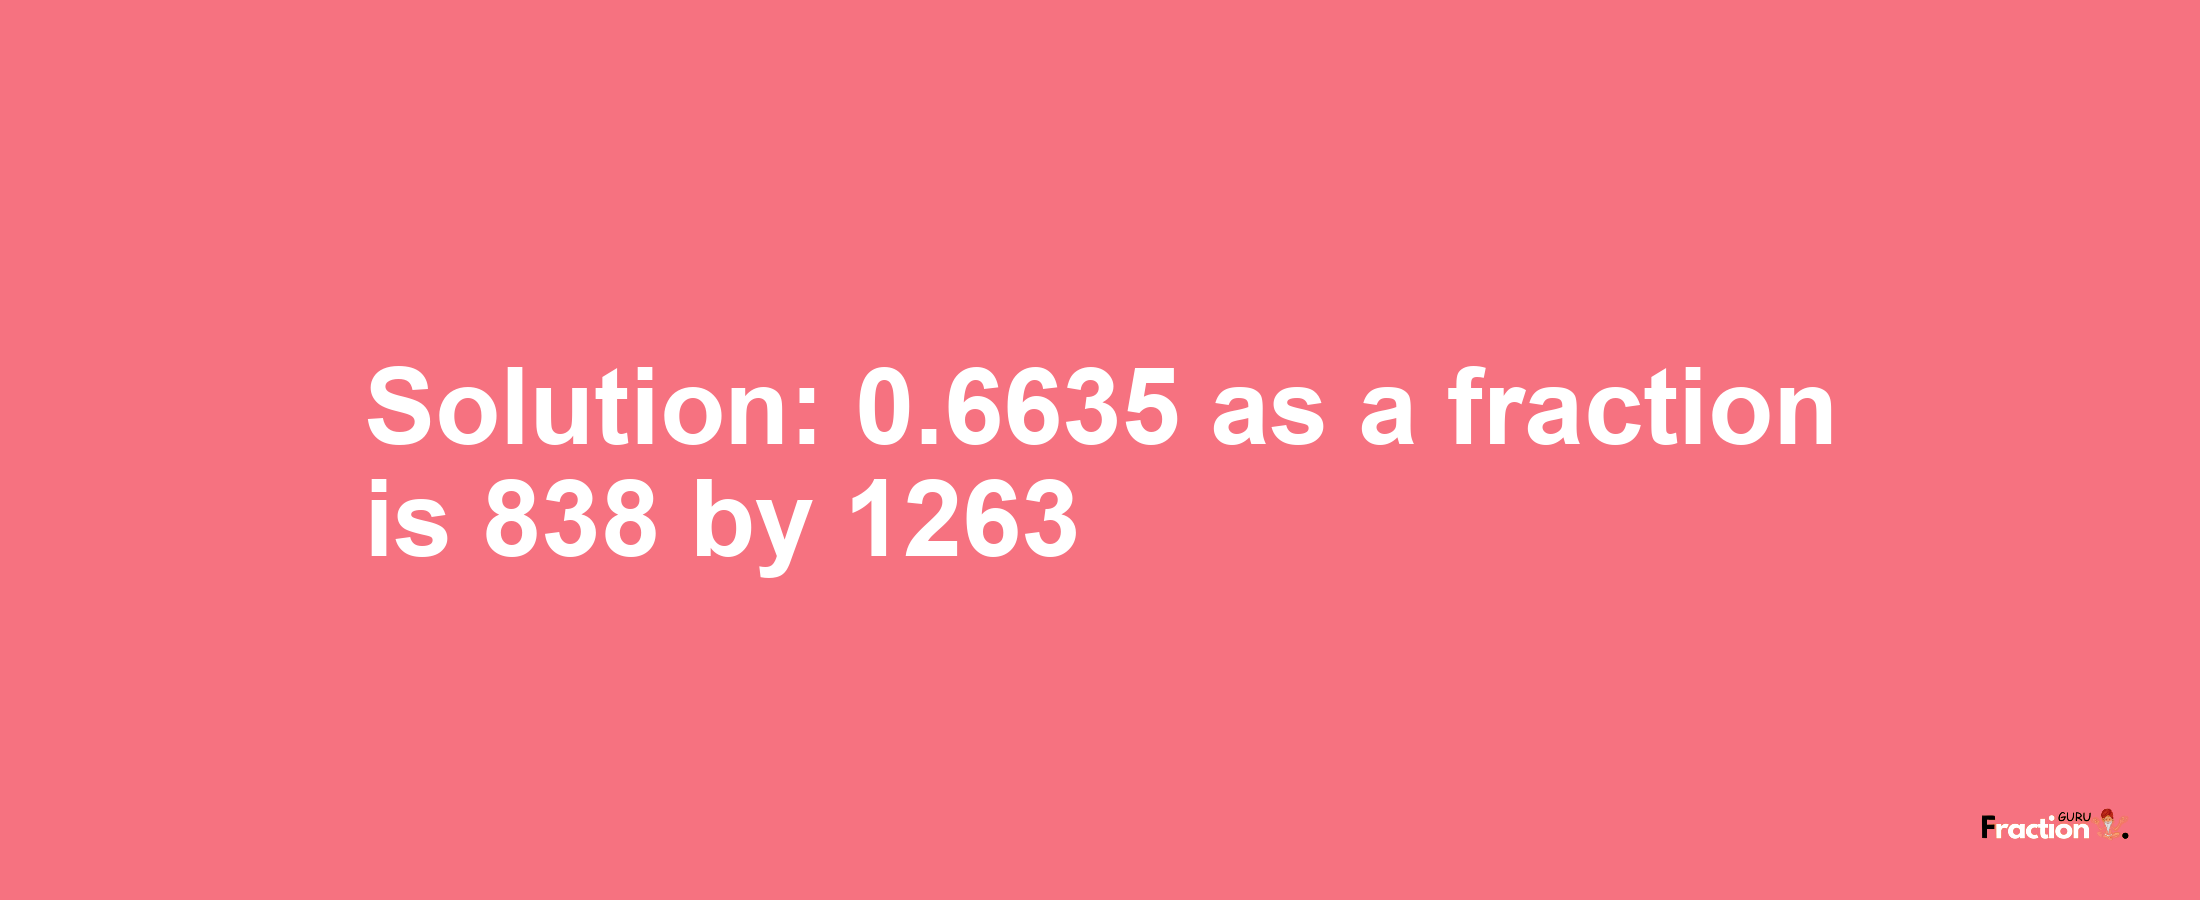 Solution:0.6635 as a fraction is 838/1263